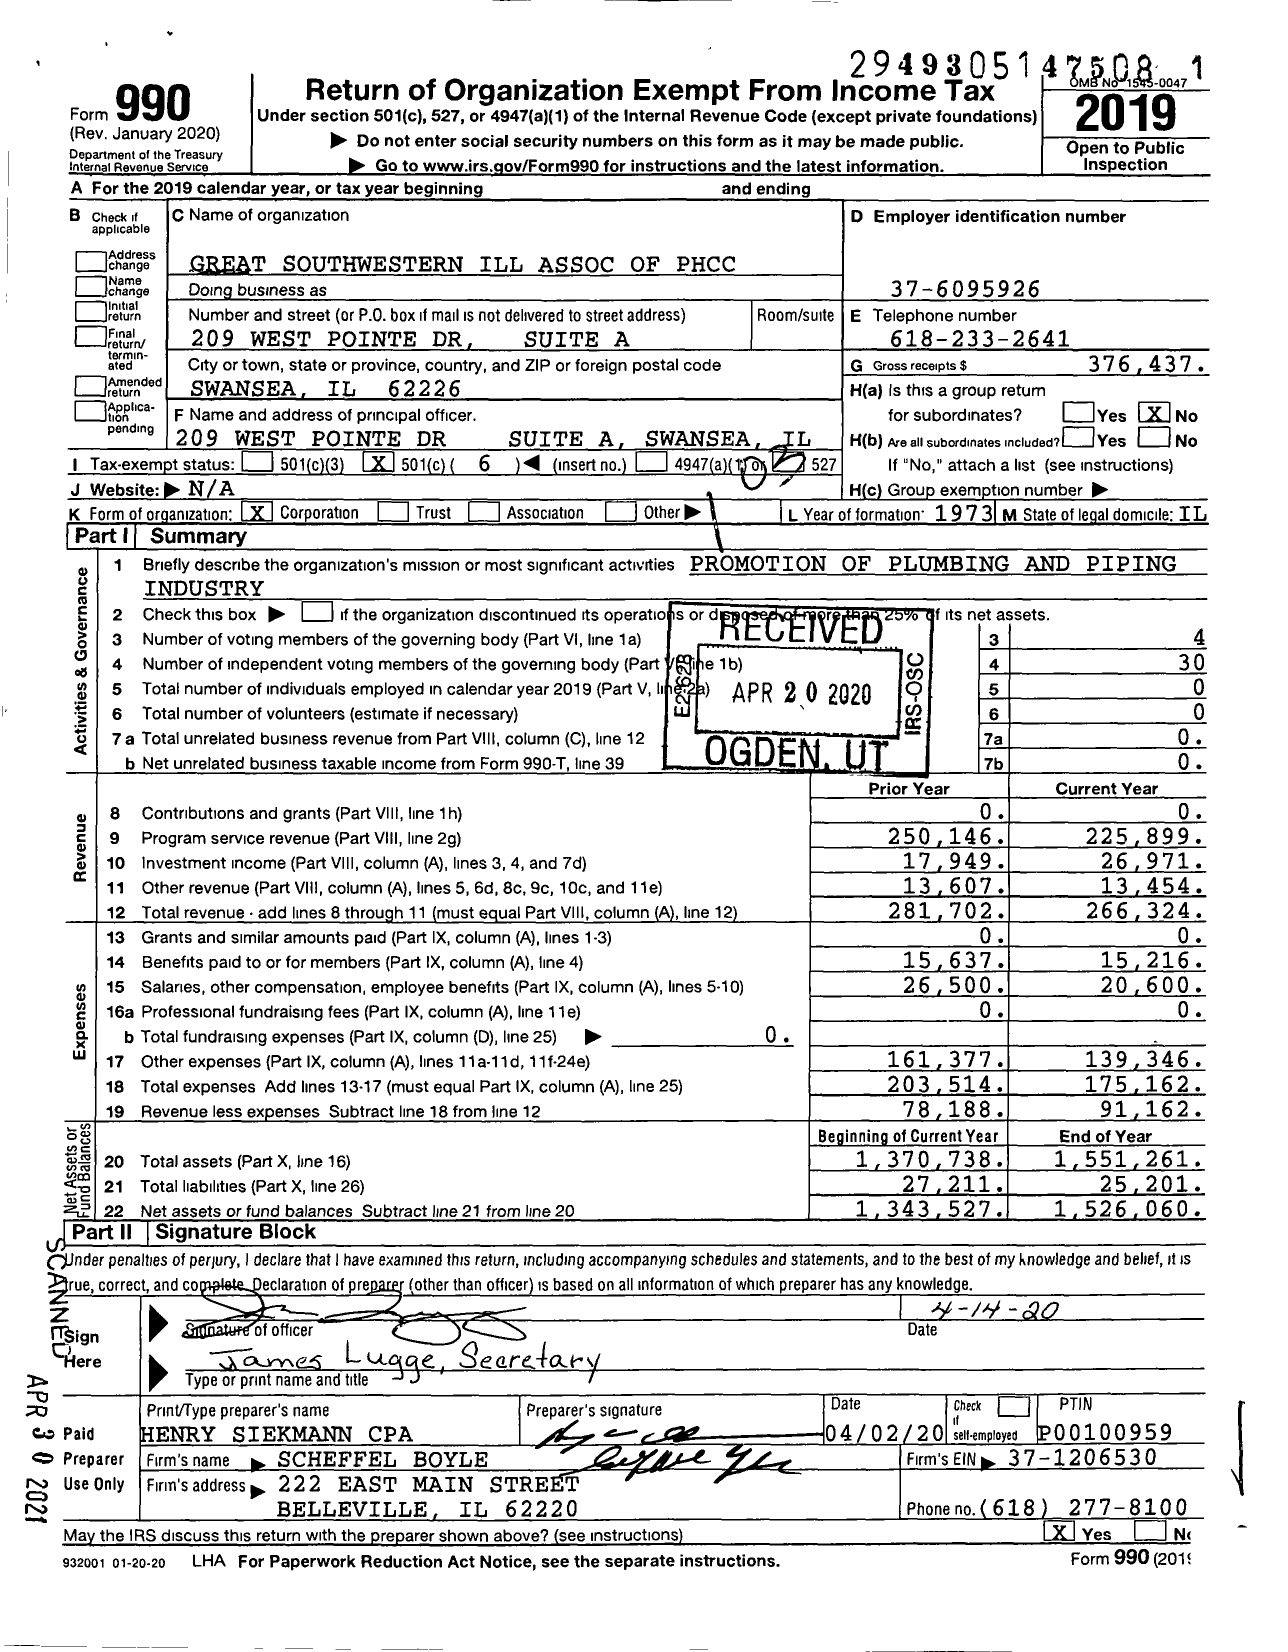 Image of first page of 2019 Form 990 for Great Southwestern Ill Association of PHCC